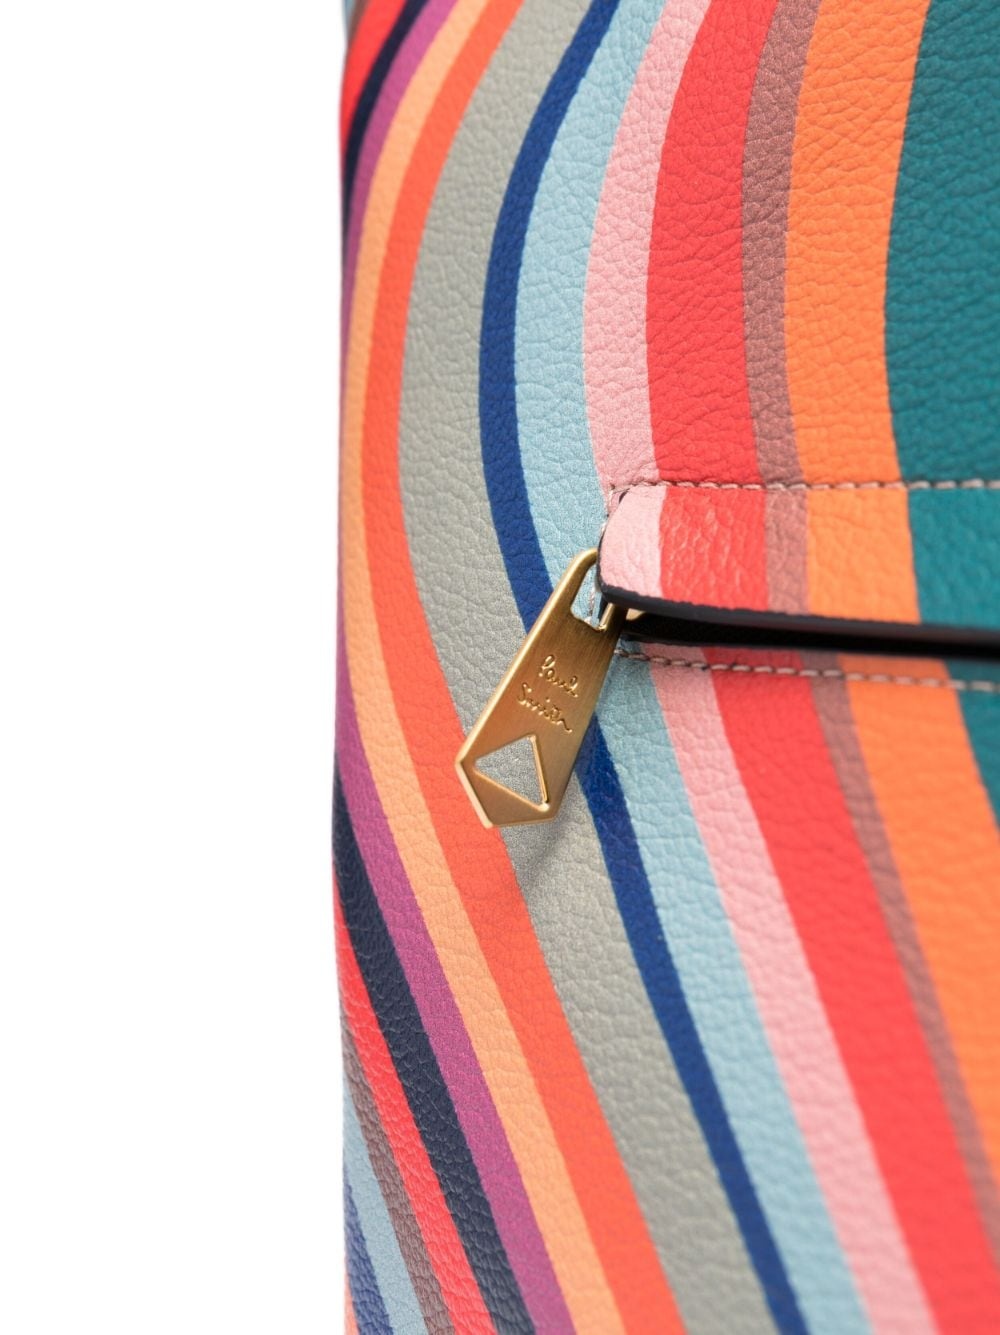 Paul Smith Spring Swirl Print Leather Tote Bag